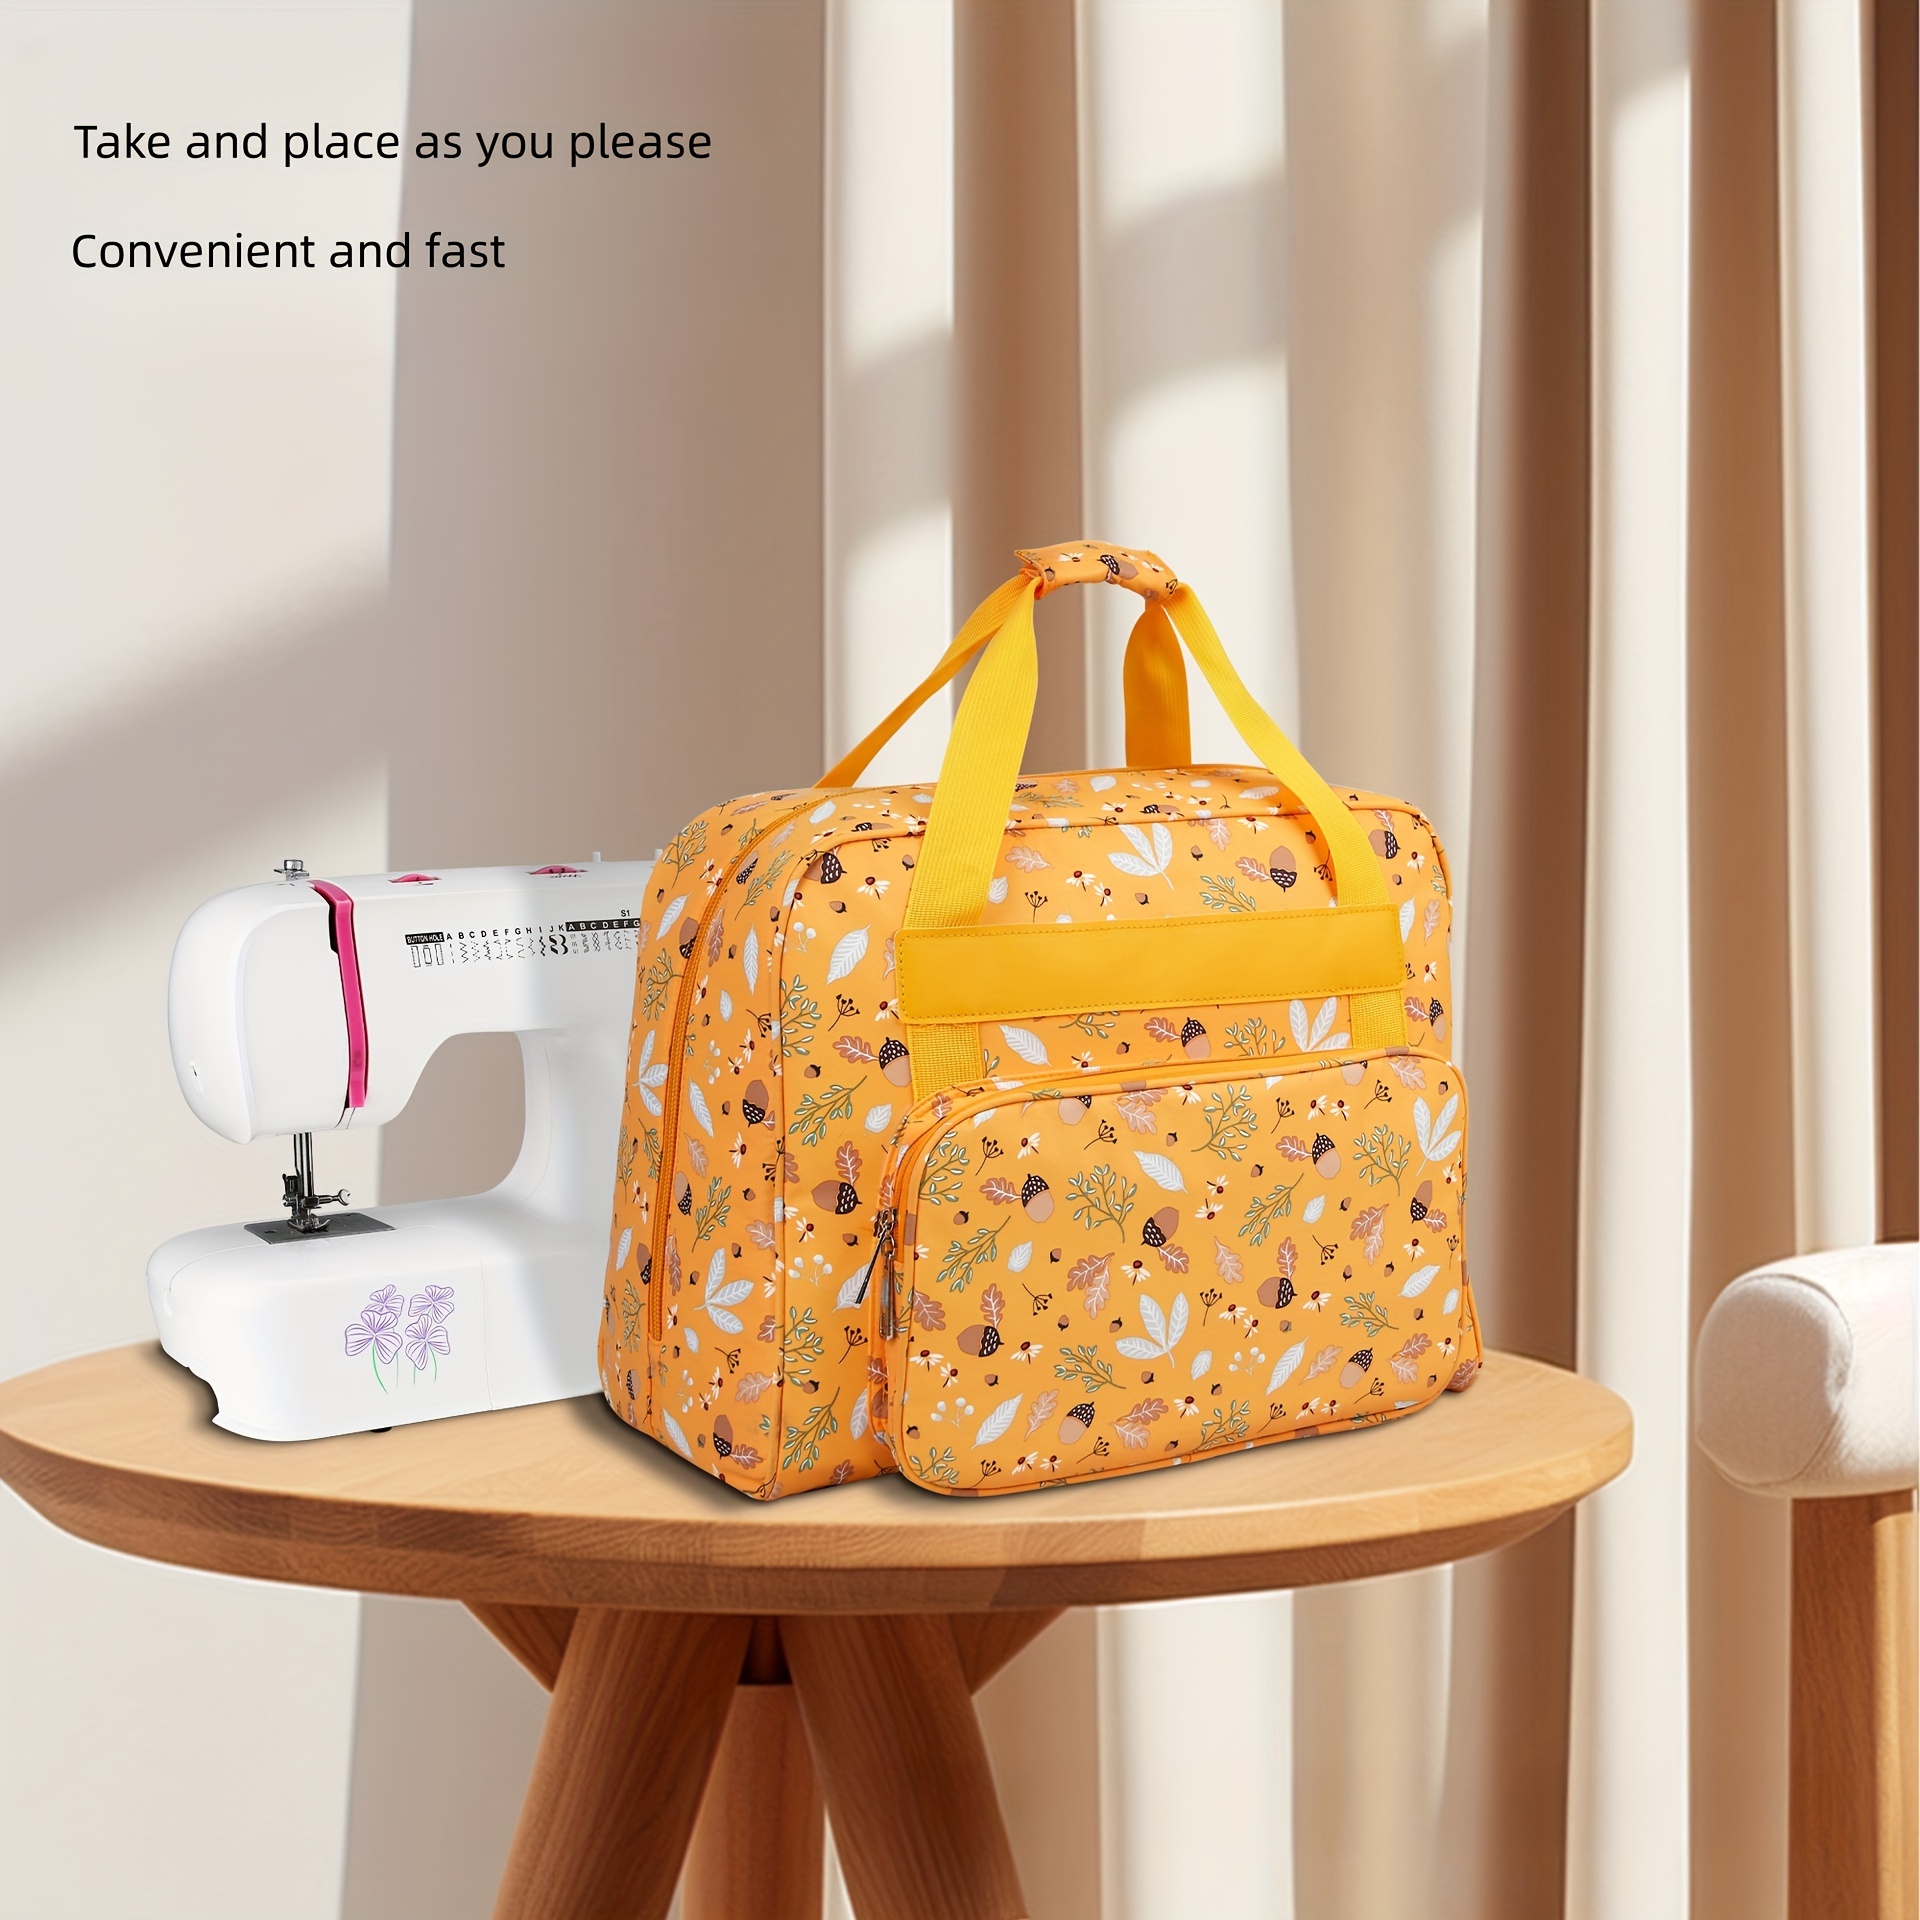 Sewing Machine Carrying Case, Carry Tote Bag, Portable Storag with